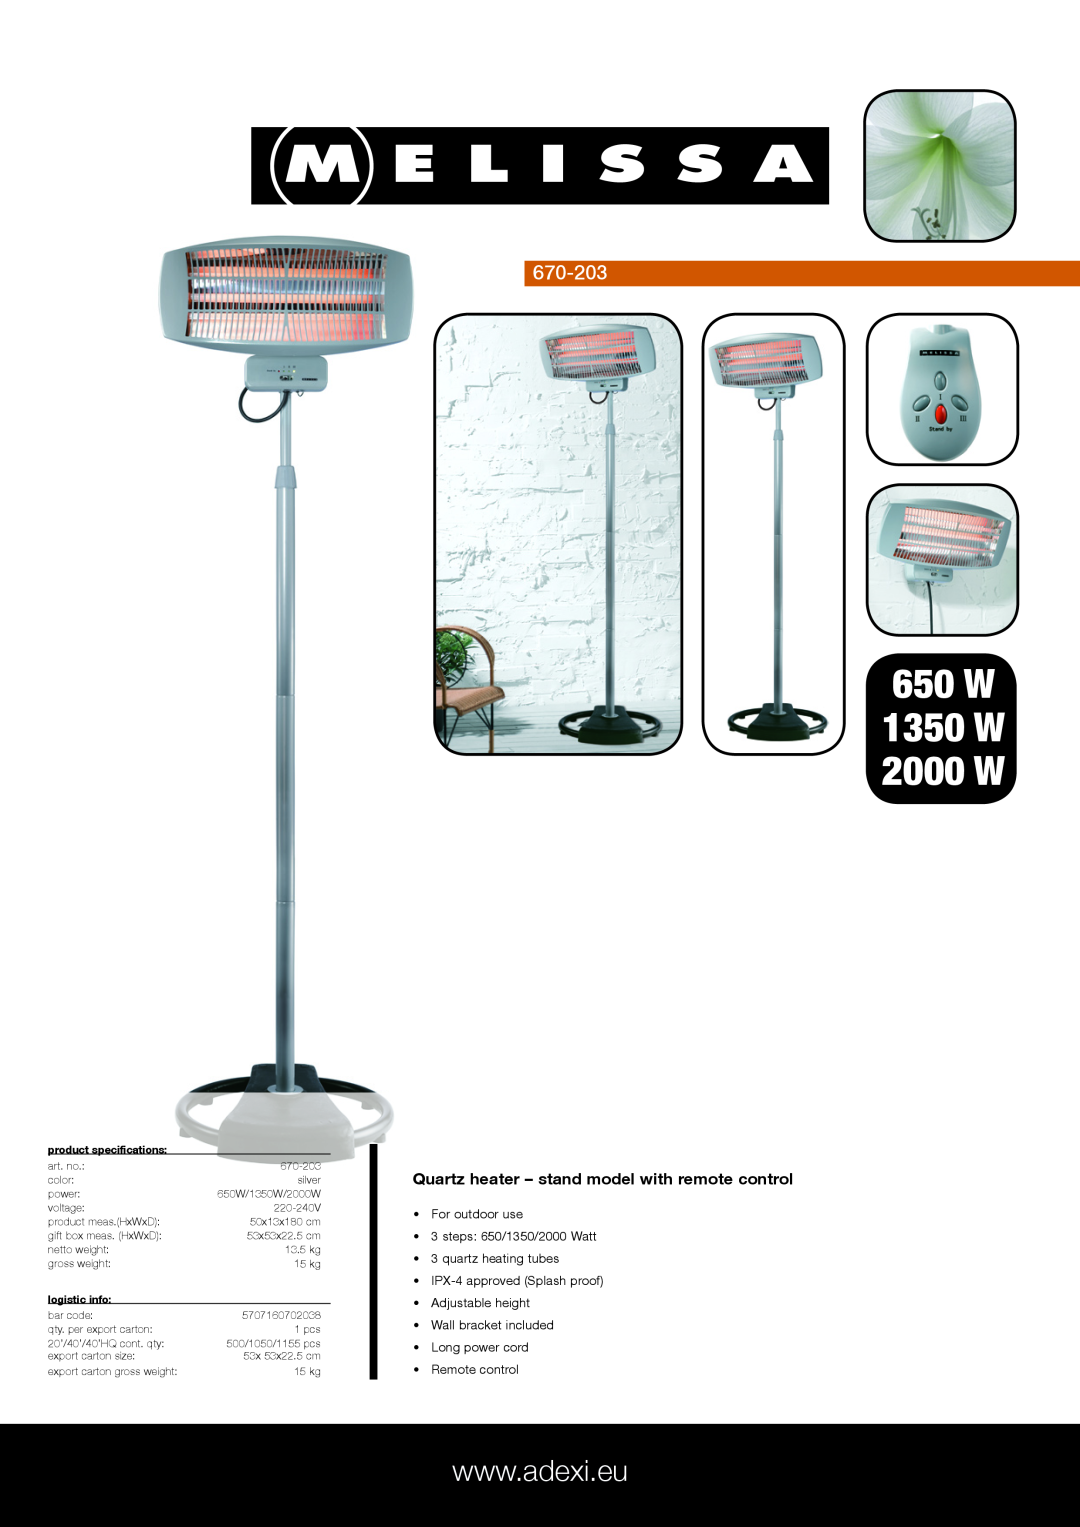 Melissa 670-203 specifications 650 W 1350 W 2000 W, Quartz heater - stand model with remote control, quartz heating tubes 